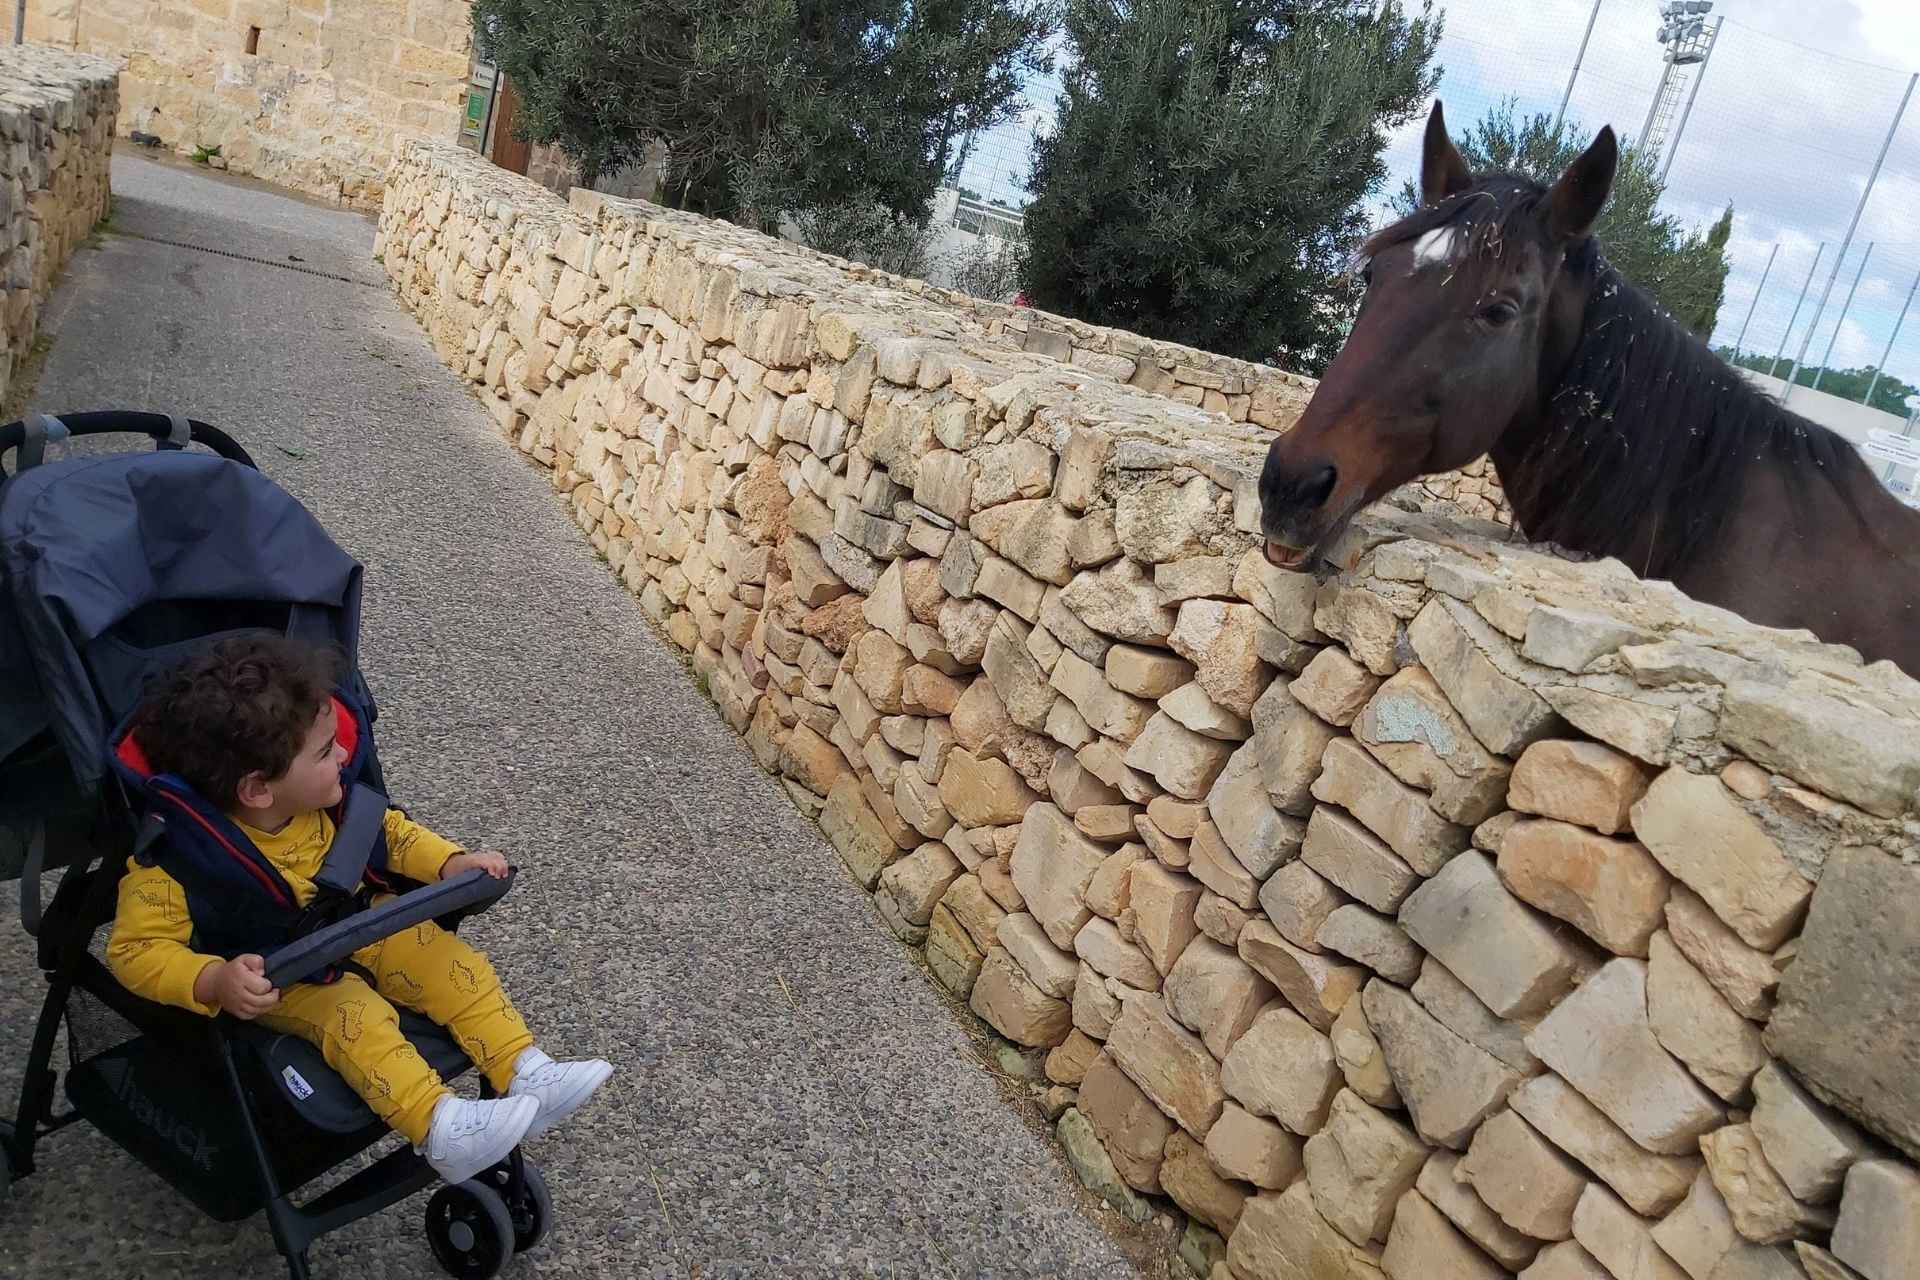 boy in a pushchair looking at a horse behind a fence